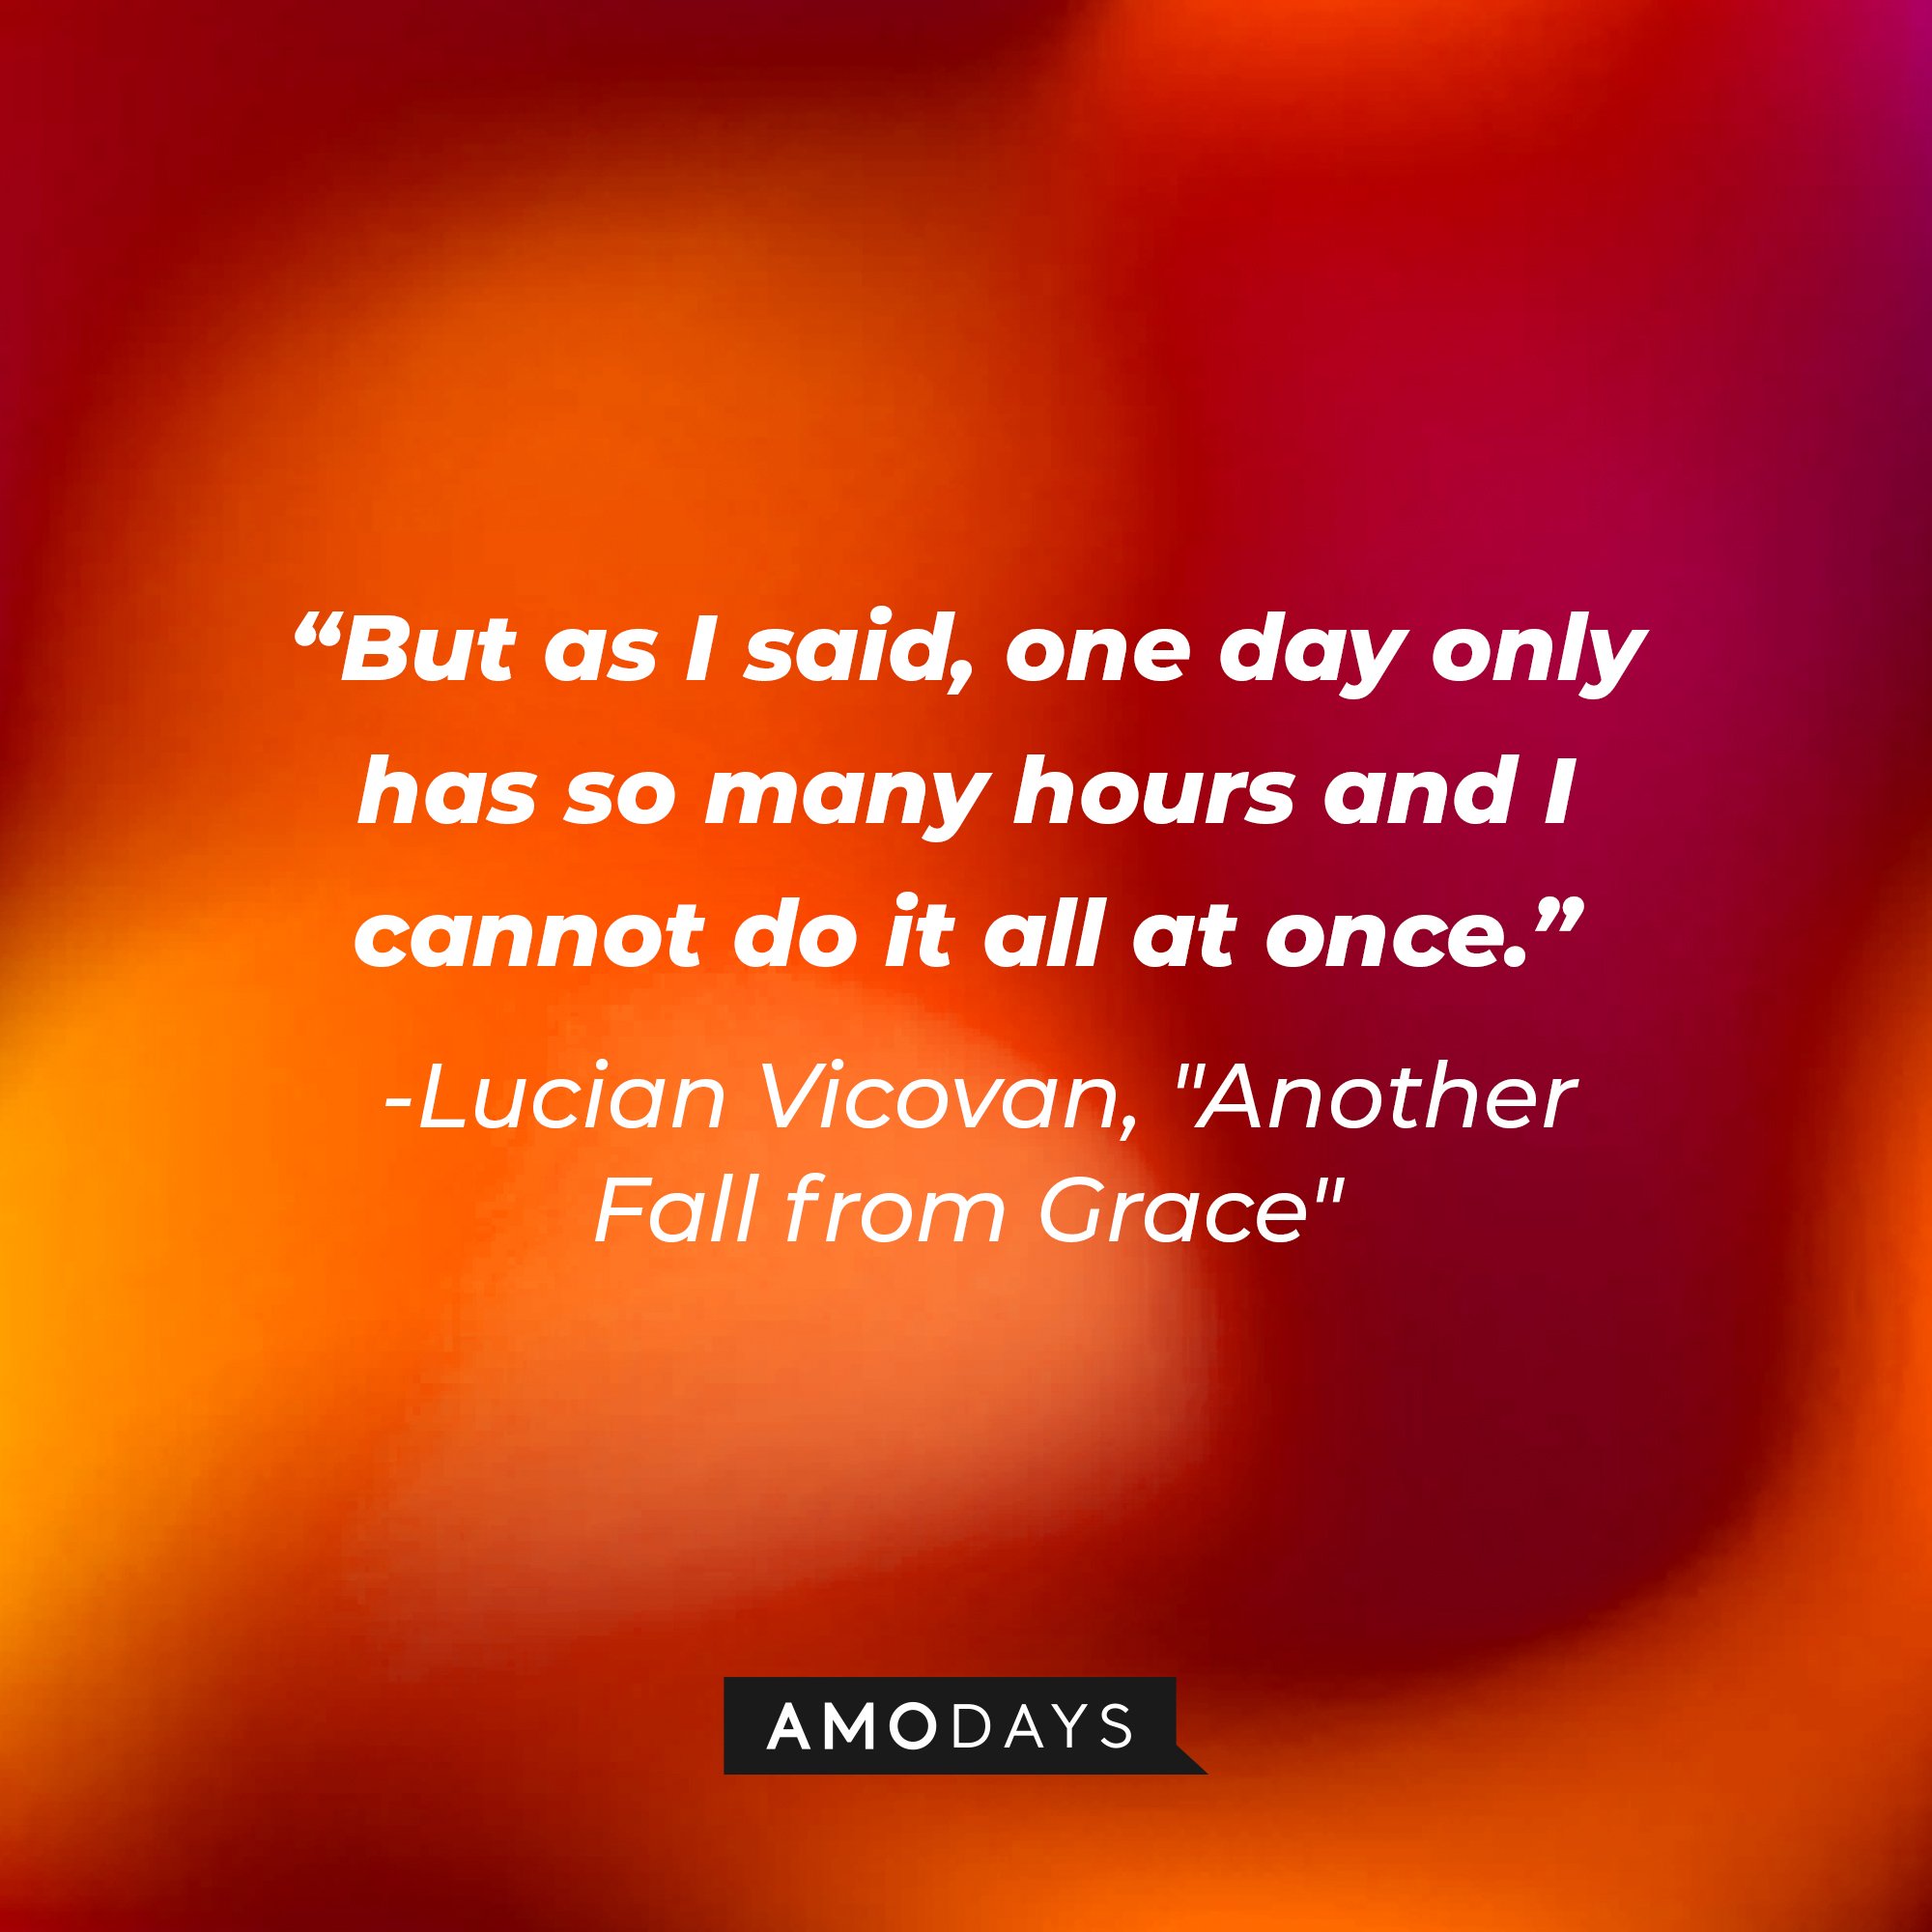 Lucian Vicovan's "Another Fall from Grace" quote: "But as I said, one day only has so many hours and I cannot do it all at once." | Image: AmoDays